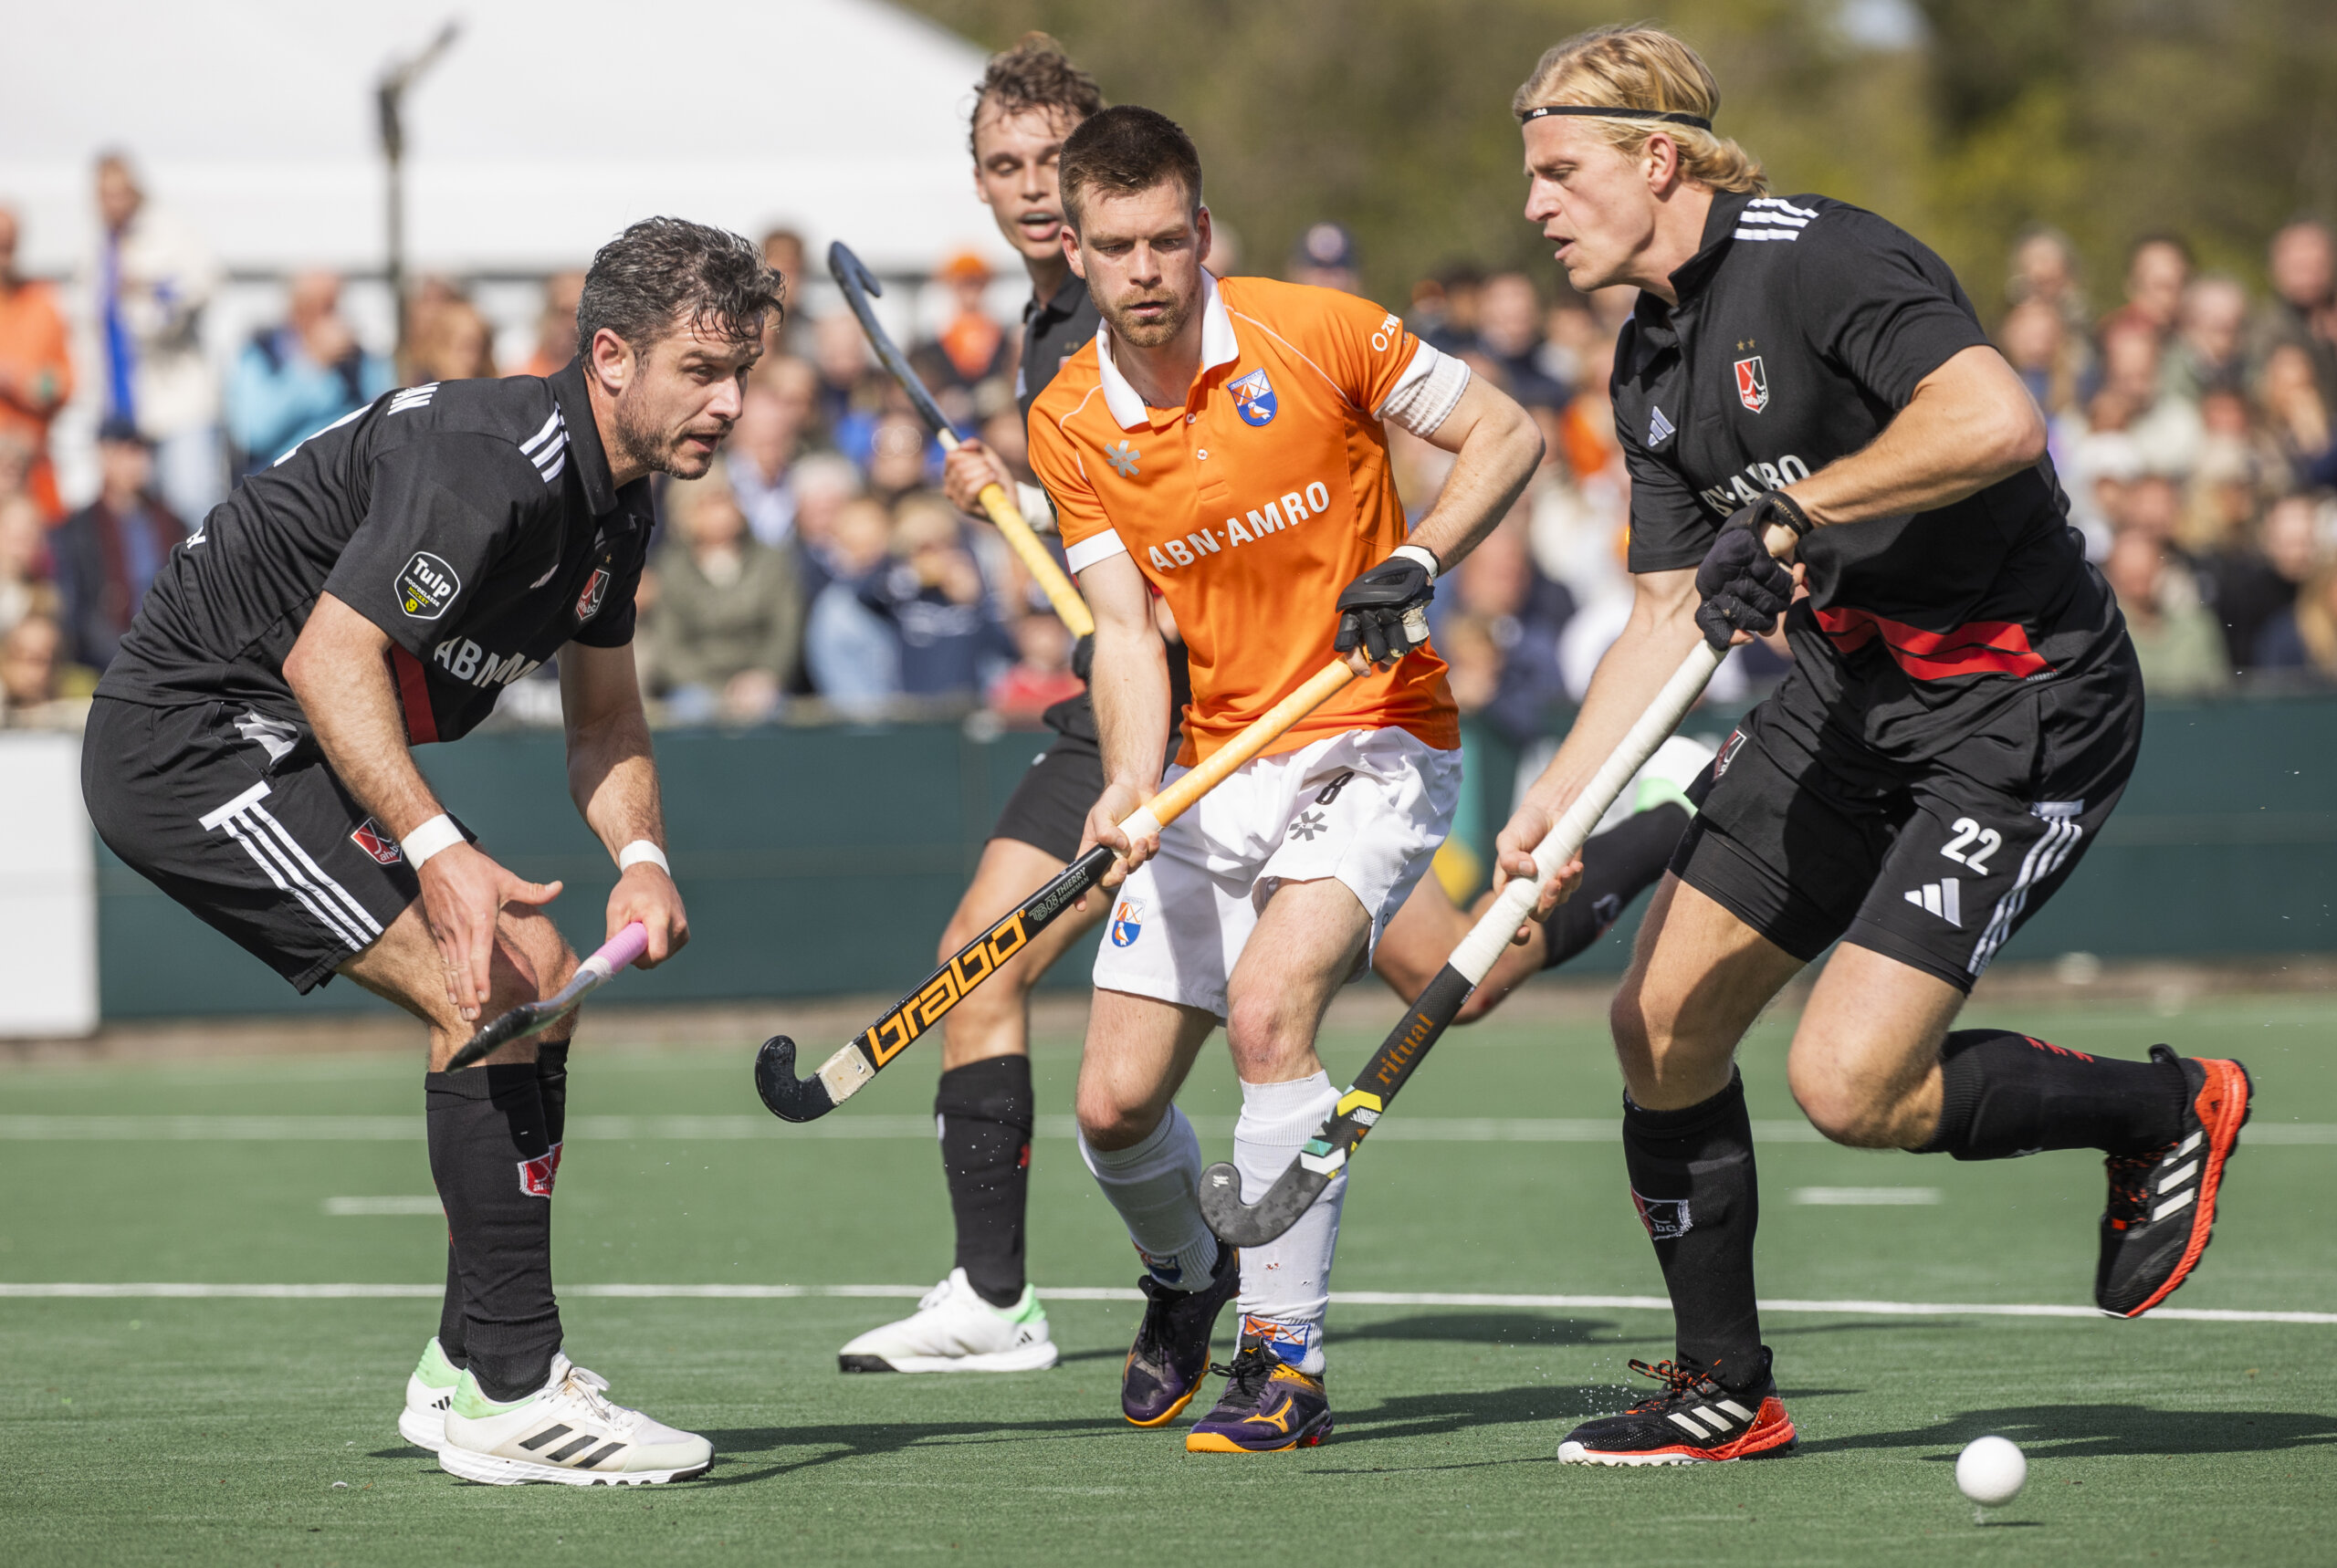 2024KS img 5154 scaled - Netherlands: Top scorers: Brinkman on a hundred goals for Bloemendaal - There were few changes at the top of the shooting rankings in the Tulp Hoofdklasse and Promotieklasse last weekend. However, a few players entered the sub-top with a spot, such as Amsterdam attacker Fiona Morgenstern and Bloemendaal captain Thierry Brinkman.